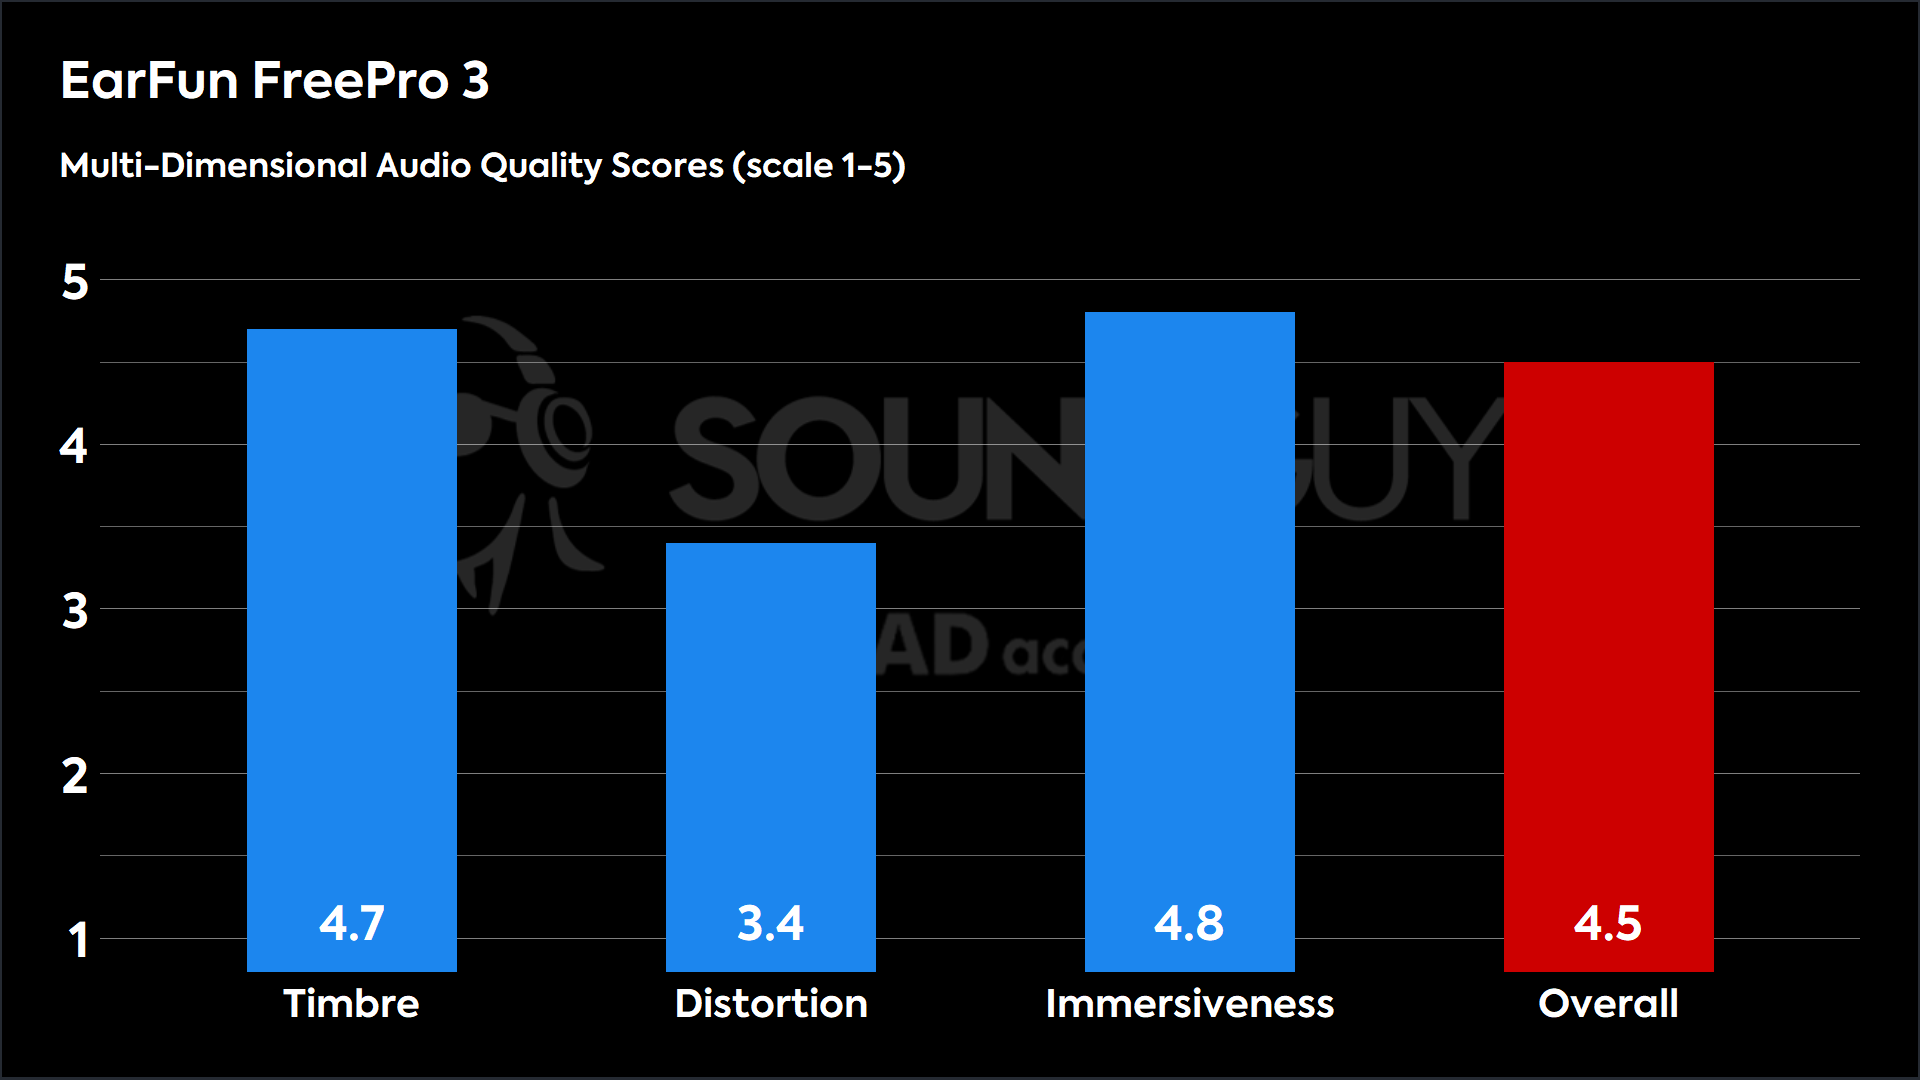 A bar chart showing the Multi-Dimensional audio quality scores for the EarFun Free Pro 3.